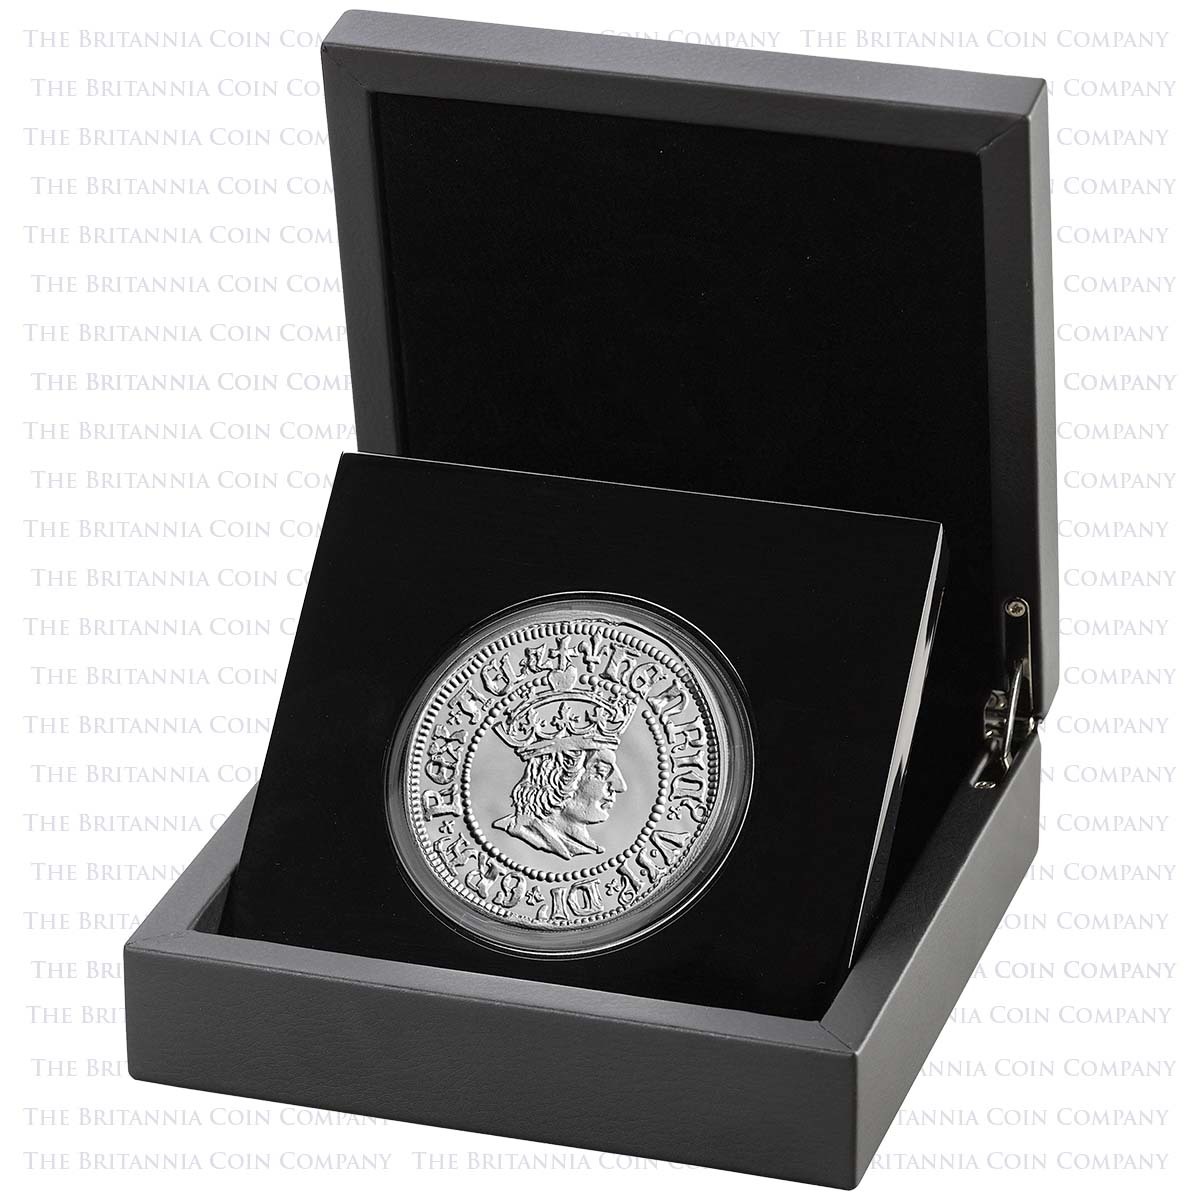 UK22H7S50 2022 British Monarchs Henry VII 5 Ounce Silver Proof Boxed